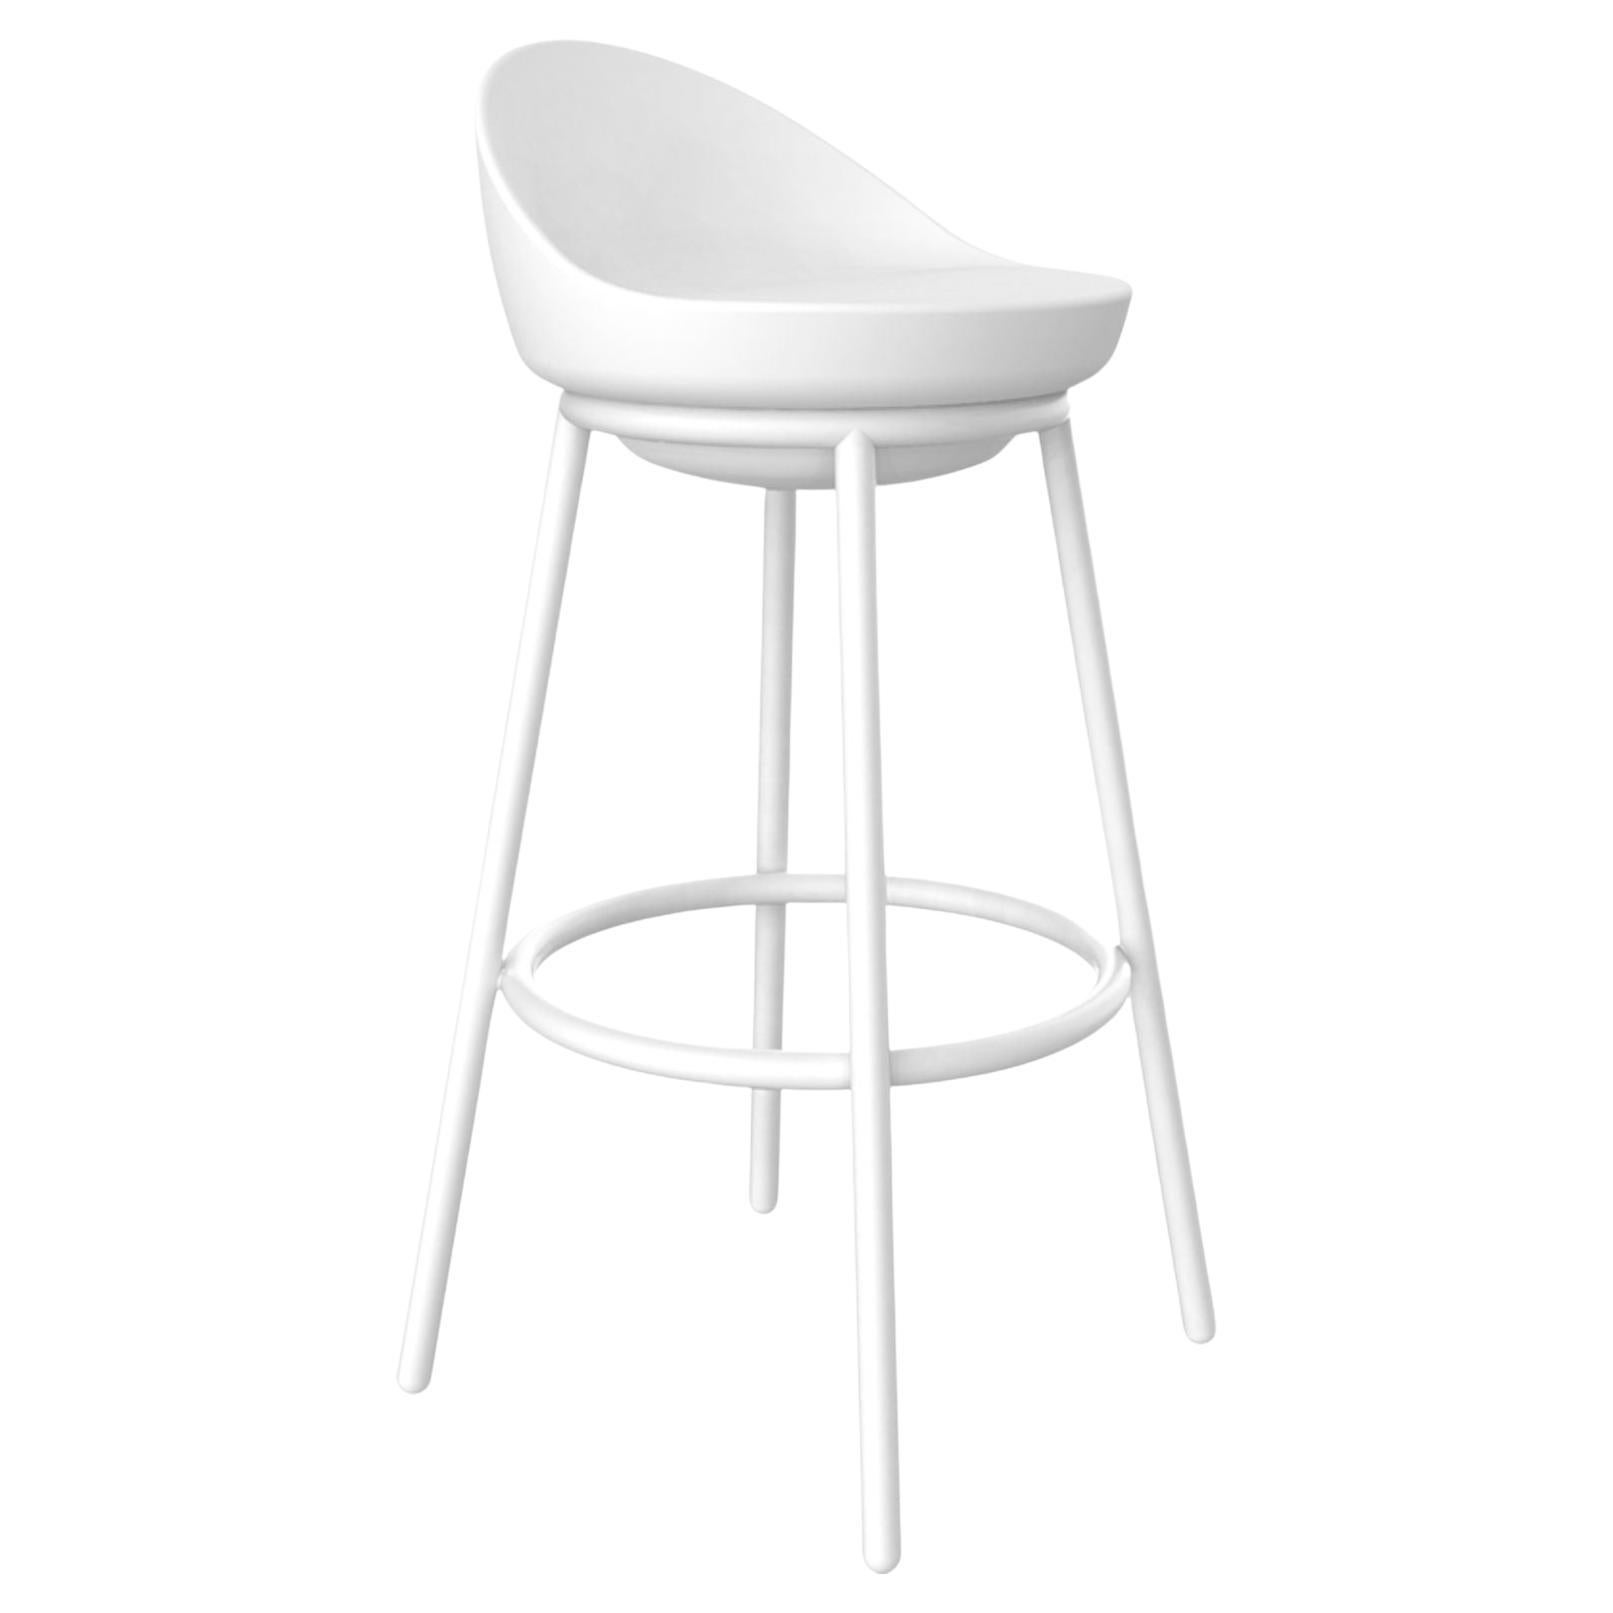 Lace White Stool by Mowee